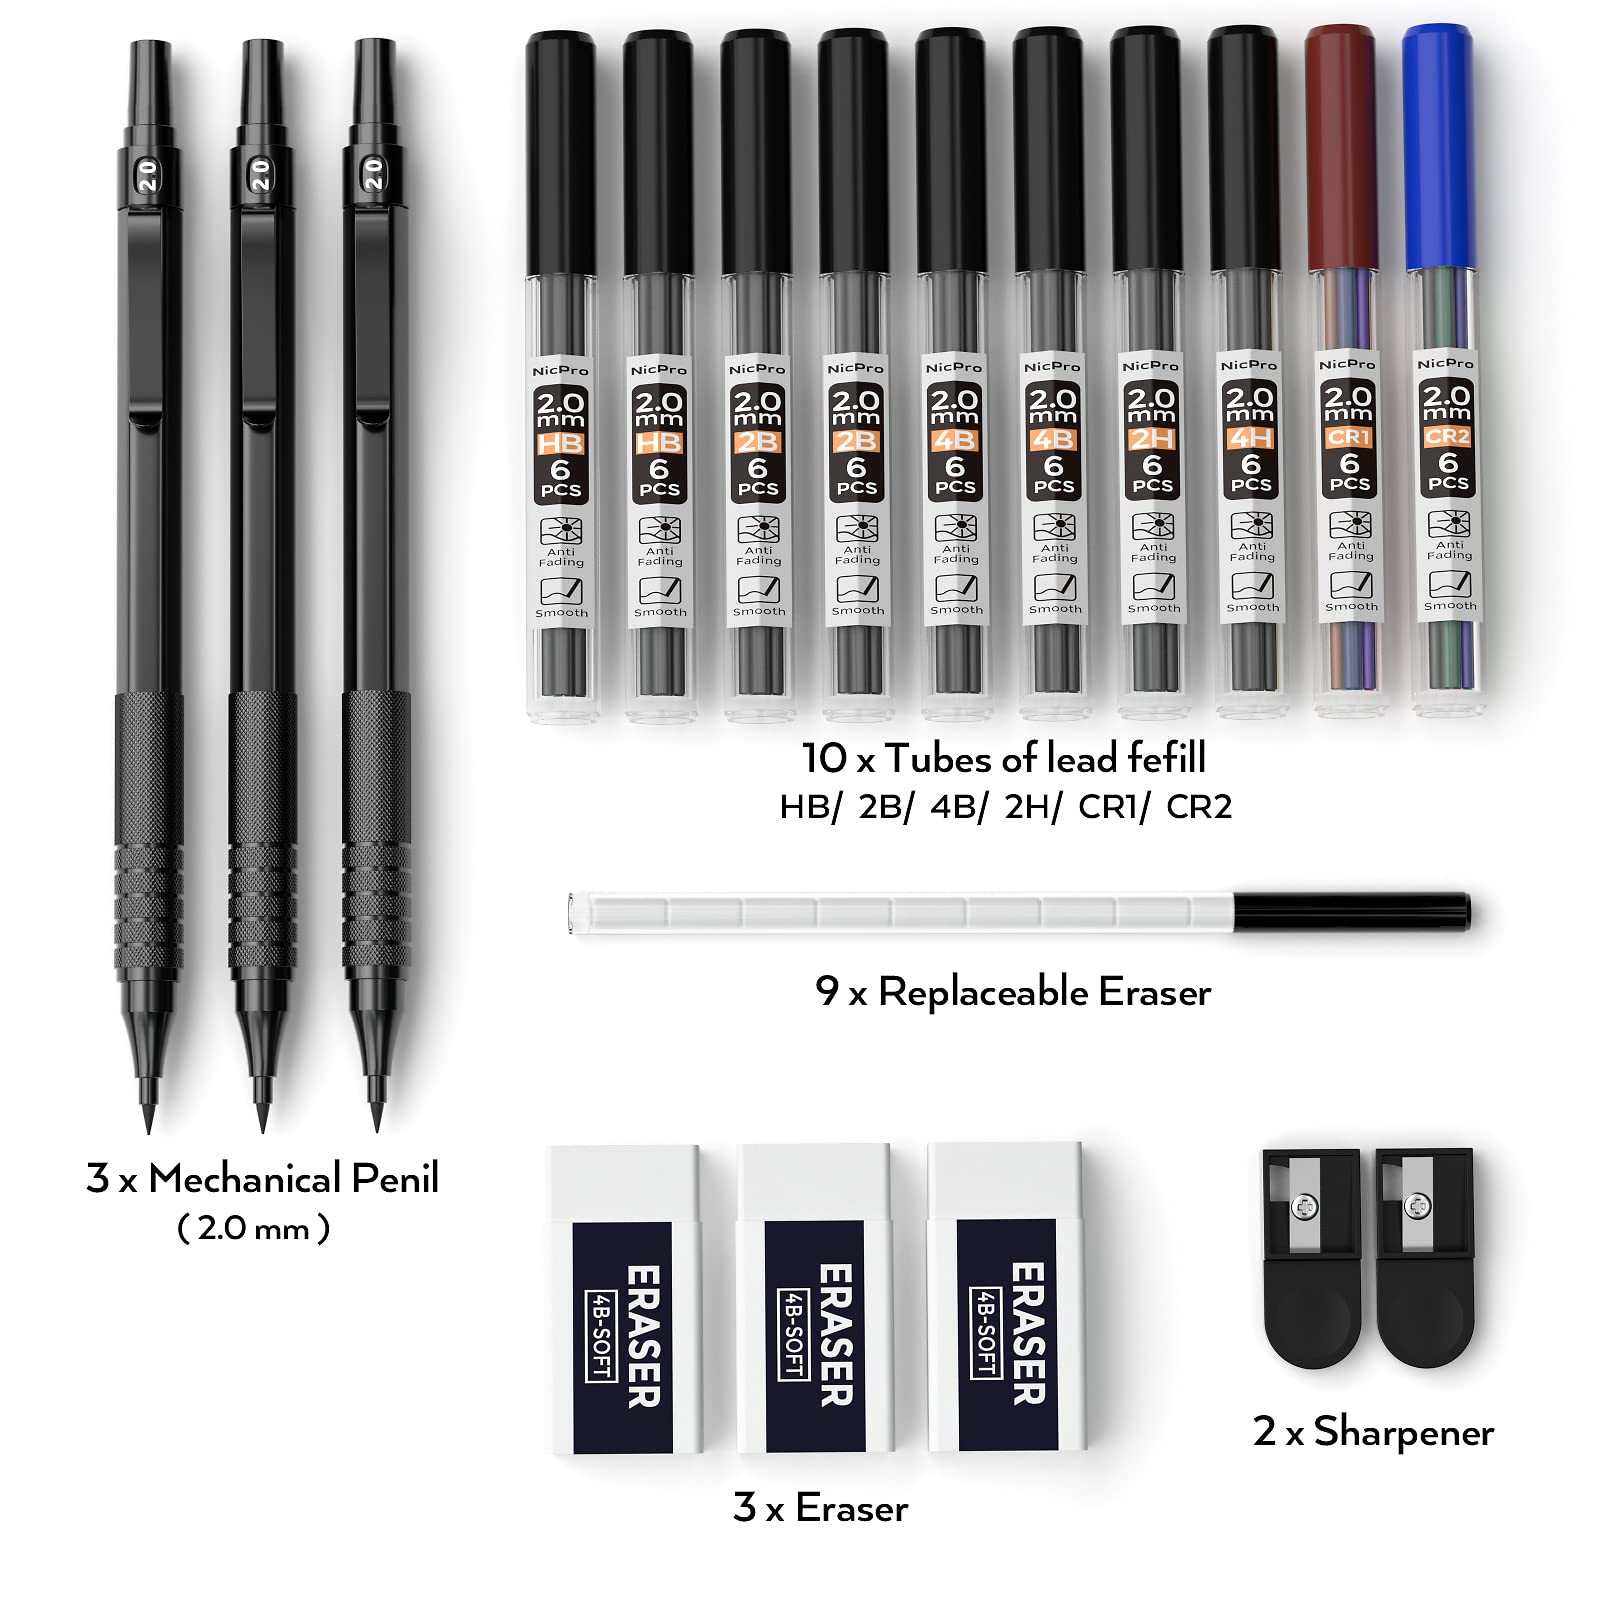 Nicpro Black Metal 2.0 Mechanical Pencil Set with Case, 3 PCS Drafting Lead Holder with 2mm Graphite Lead Refill (HB 2H 4H 2B 4B) & Colors, Sharpeners, Erasers for Artist Writing, Drawing, Sketching